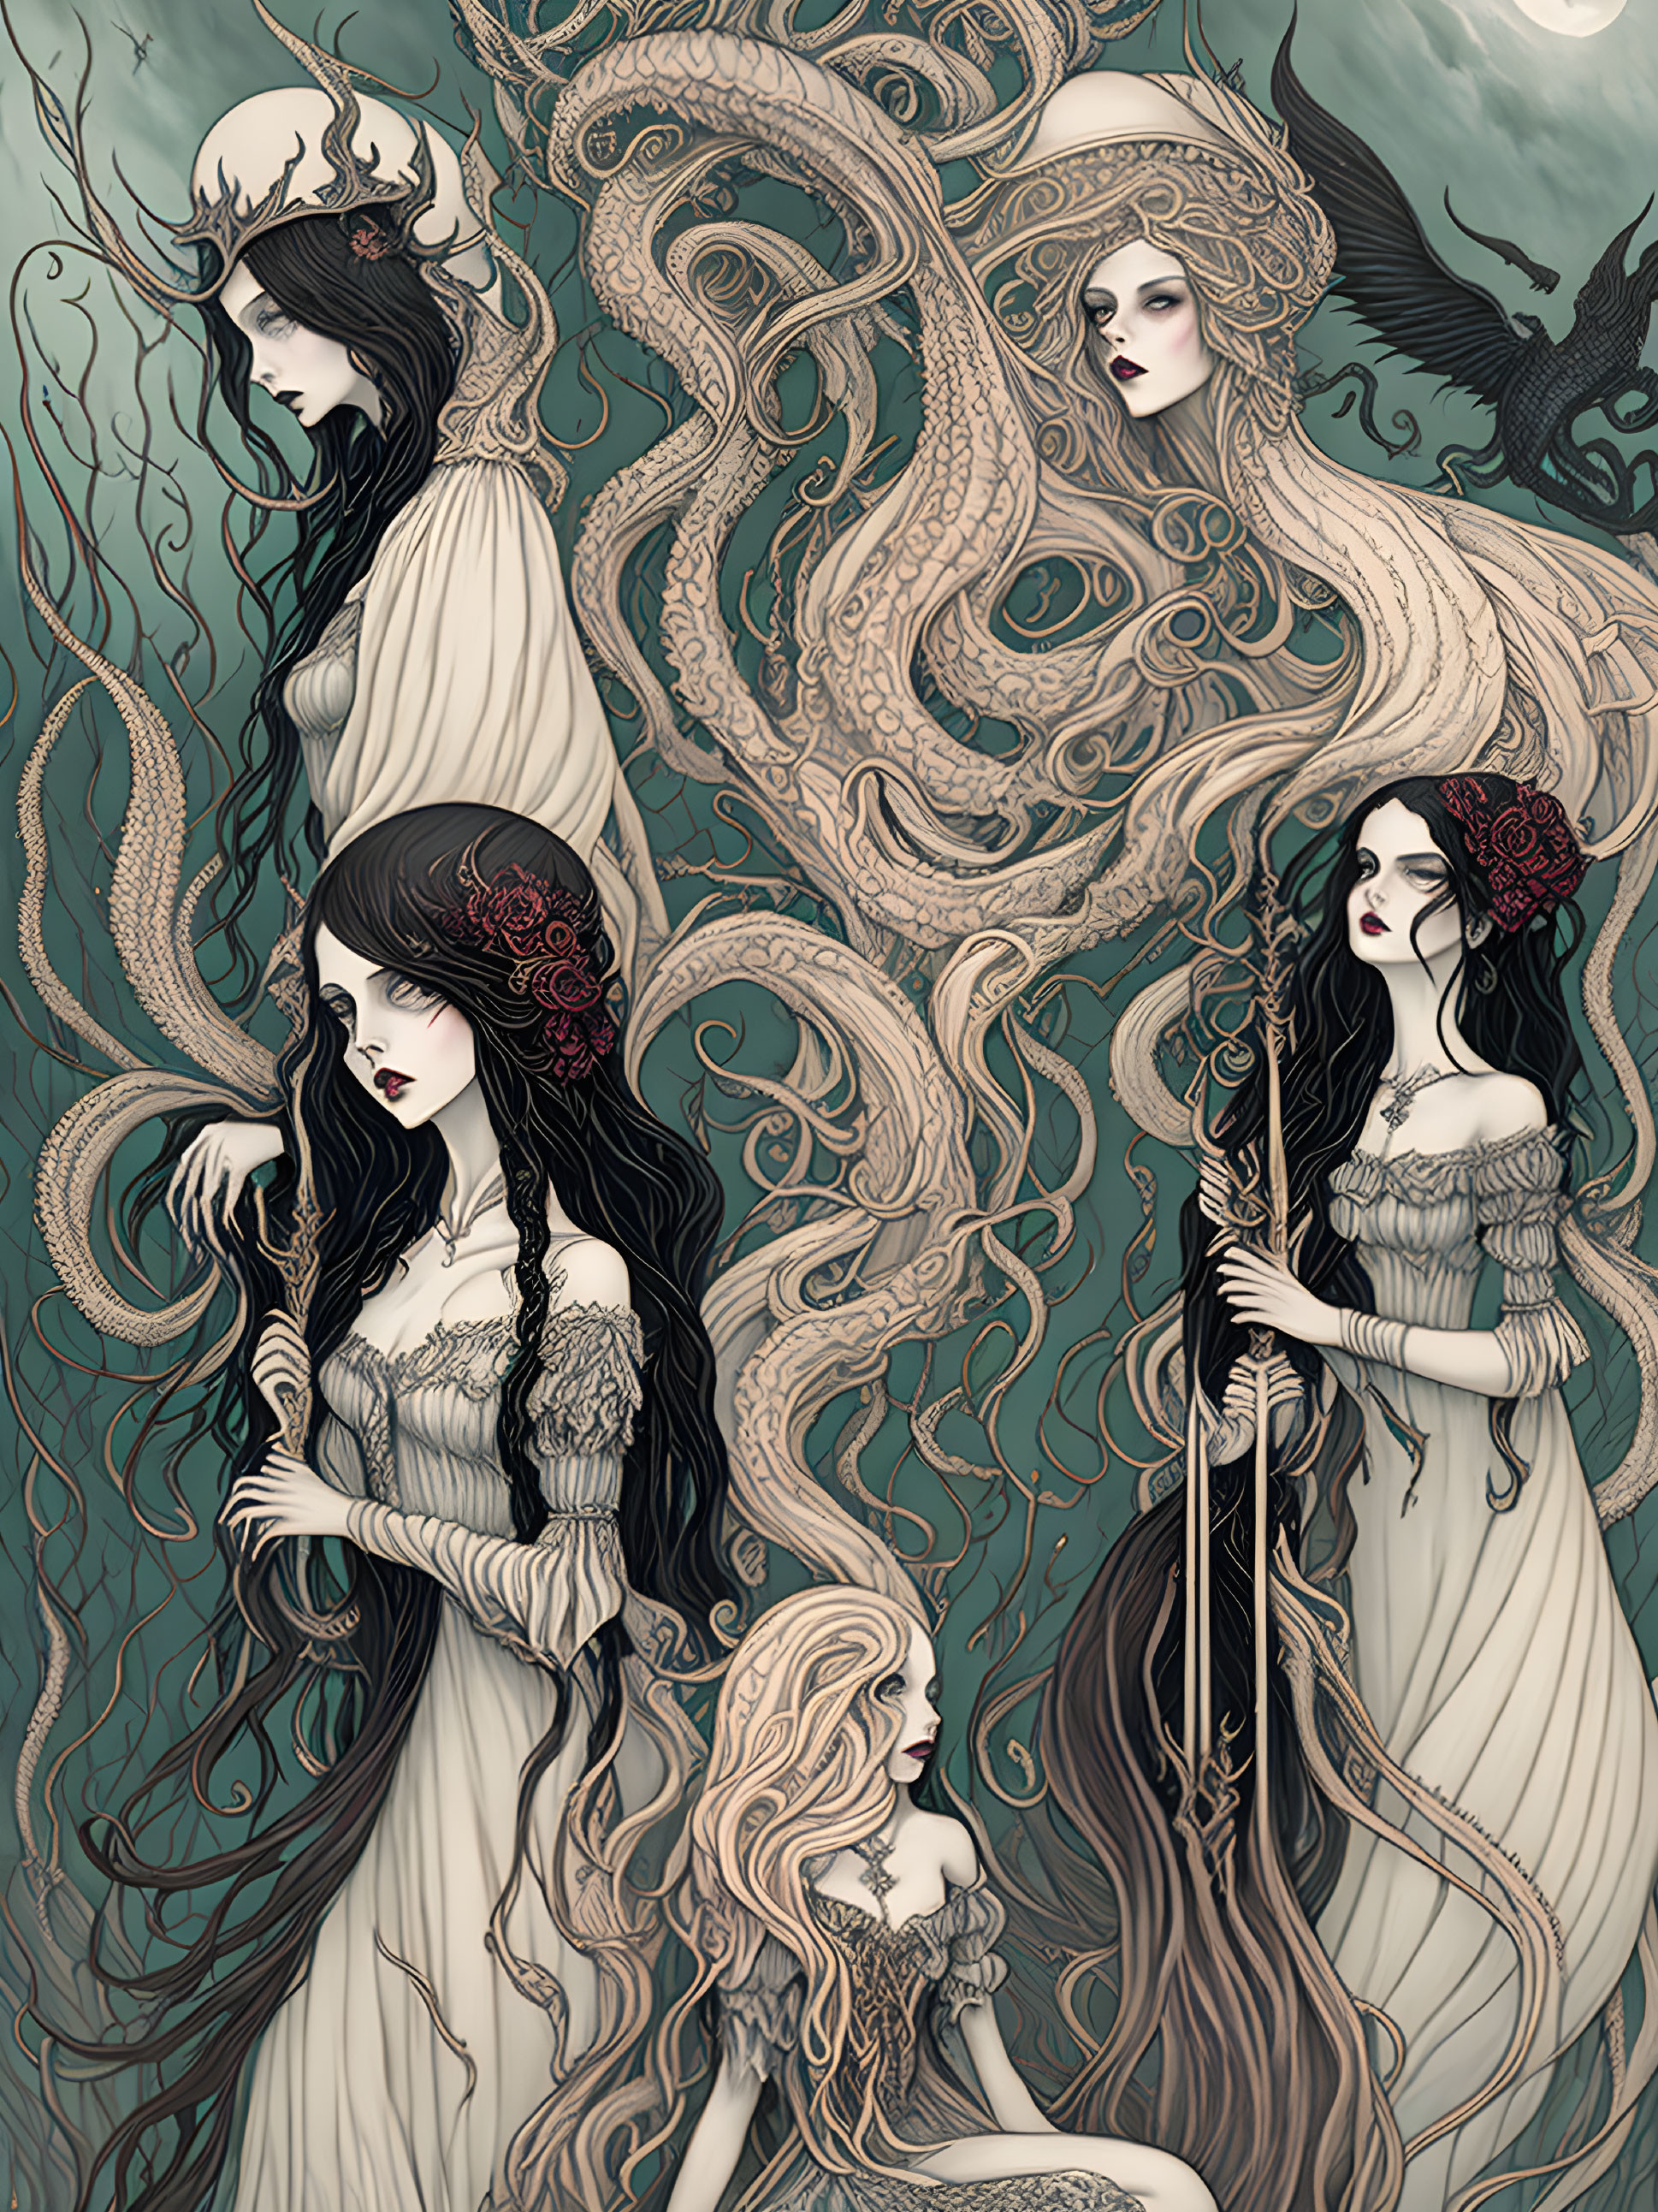 Four ethereal women in flowing attire among intricate floral and tentacle motifs in a haunting arboreal setting